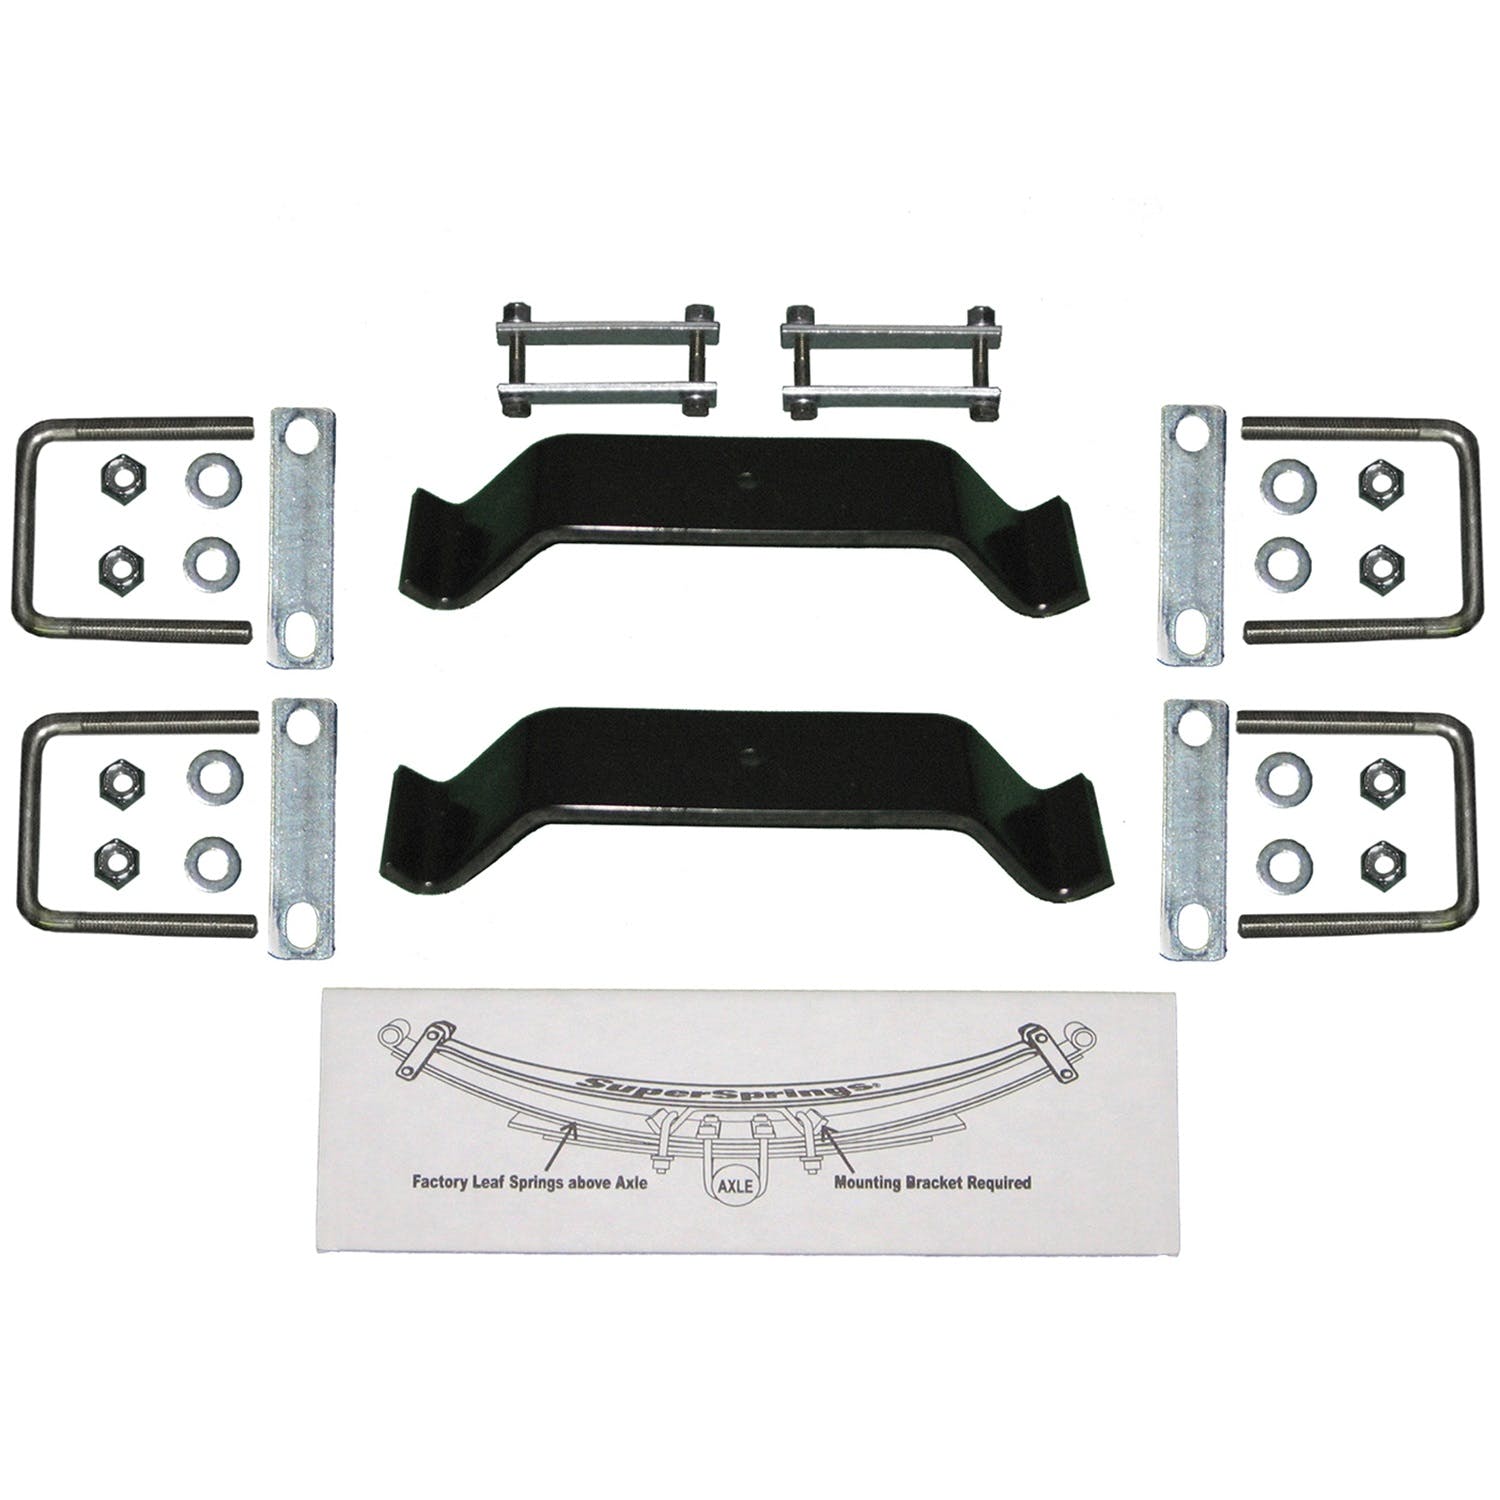 SuperSprings MXKT Mounting Kit used for specified SuperSprings applications